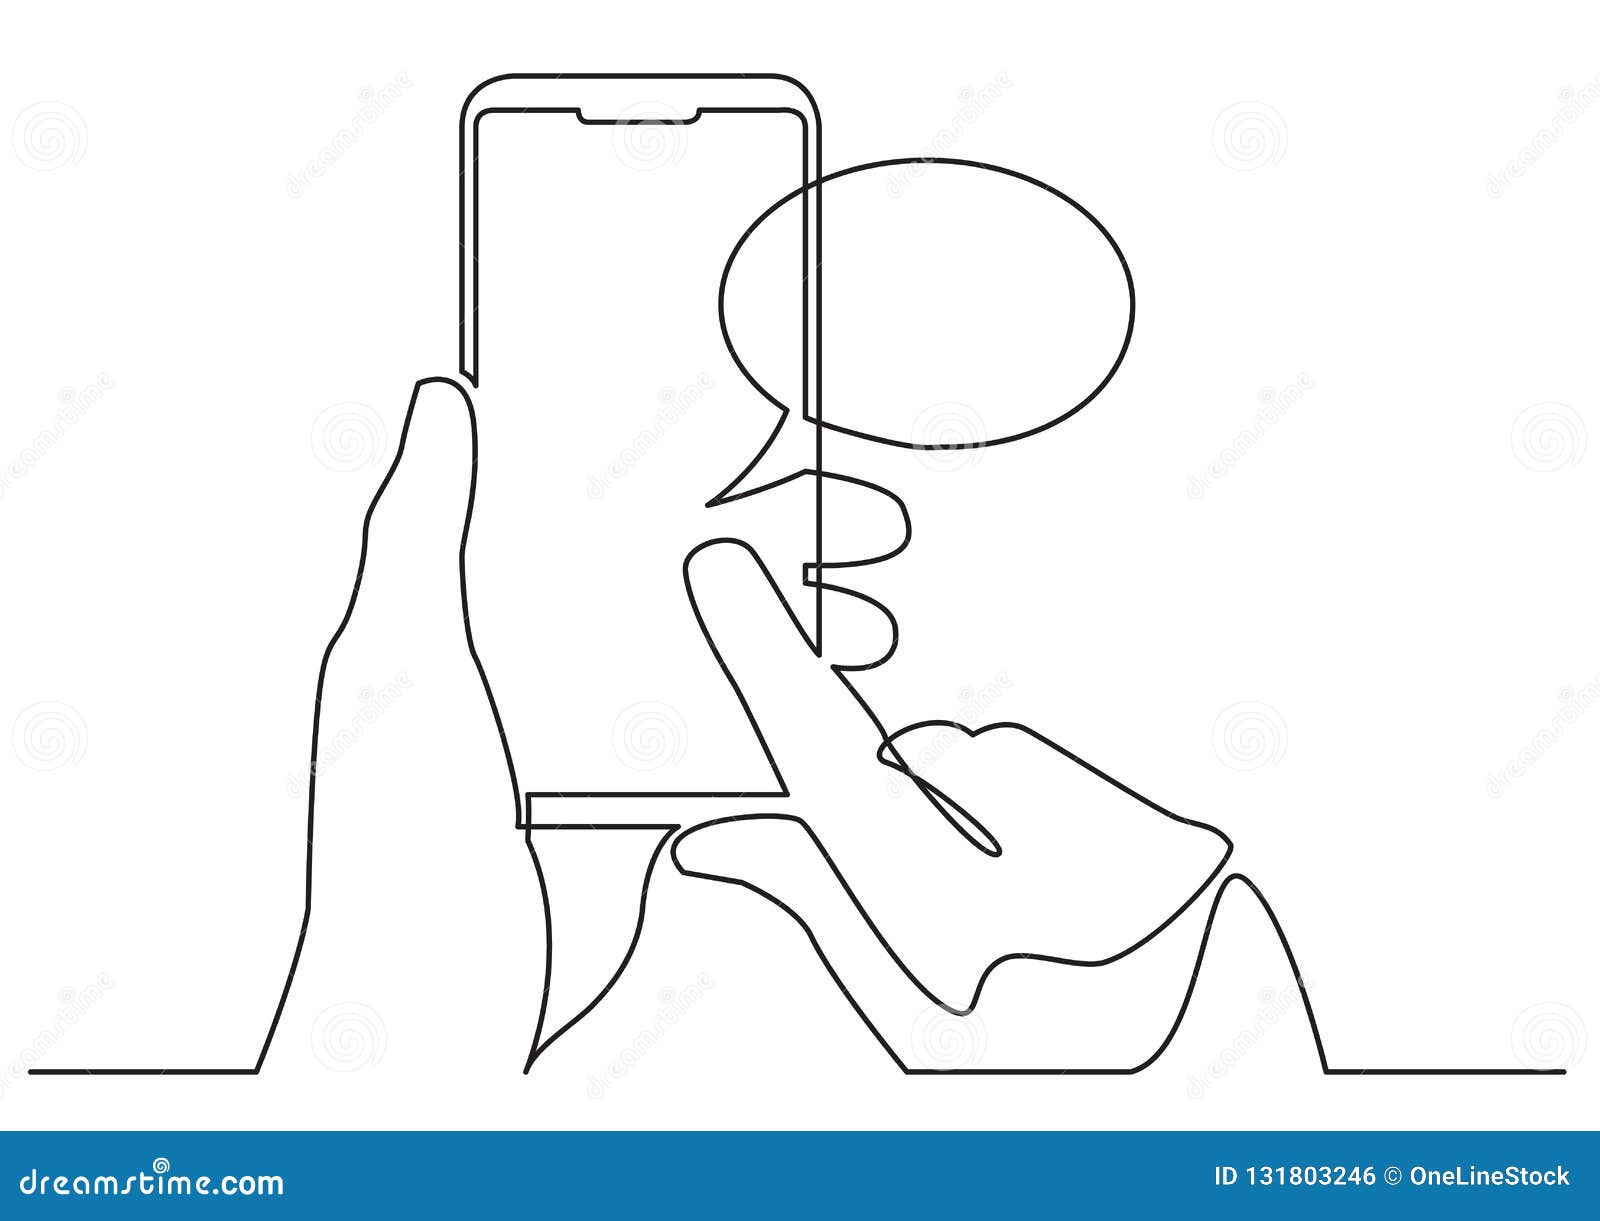 Continuous Line Drawing Of Hand Using Social Media Mobile